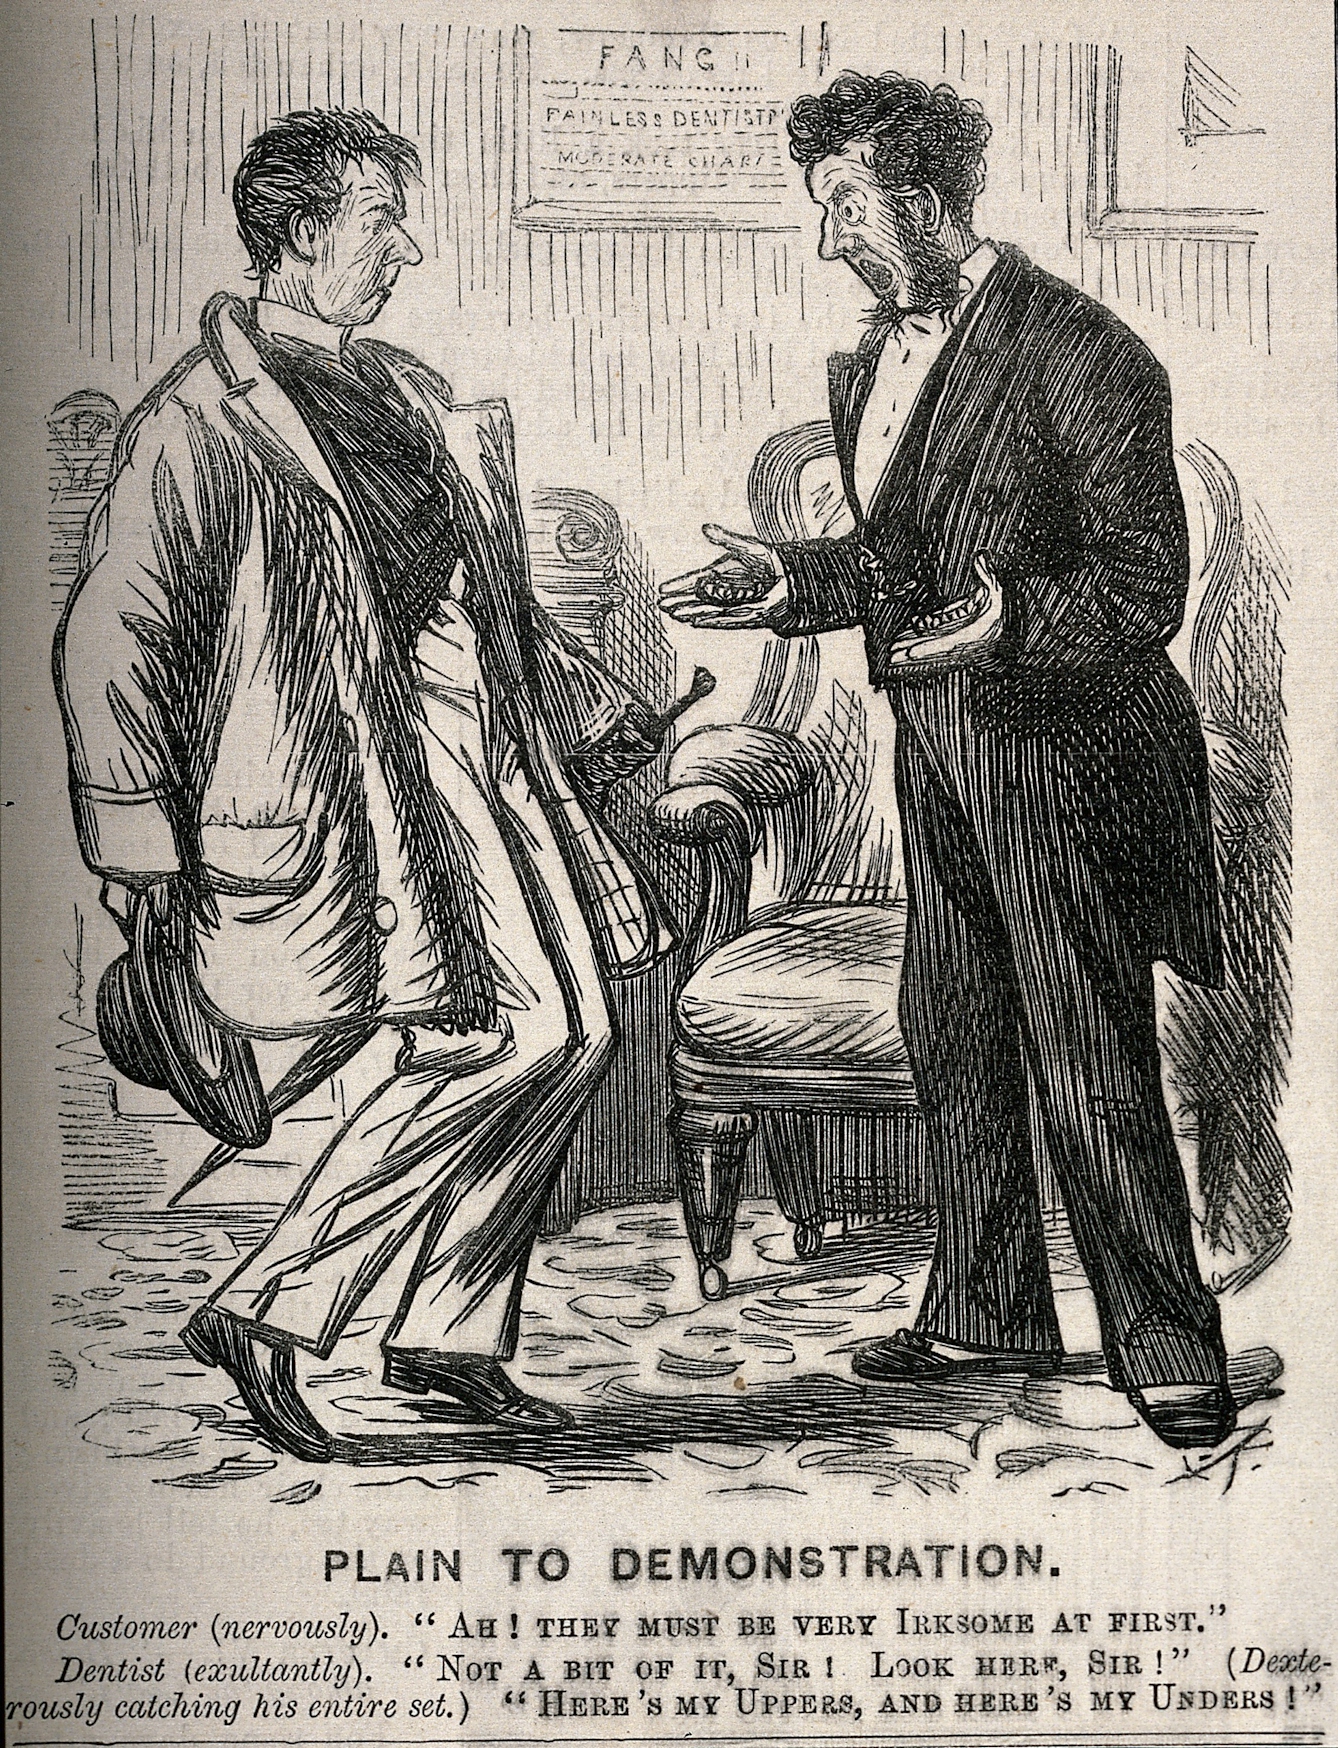 Black and white punch cartoon sketch depicting a man who nervously questions whether dentures are irksome, and his dentist who has taken out his dentures and is giving a demonstration of how much he likes them.